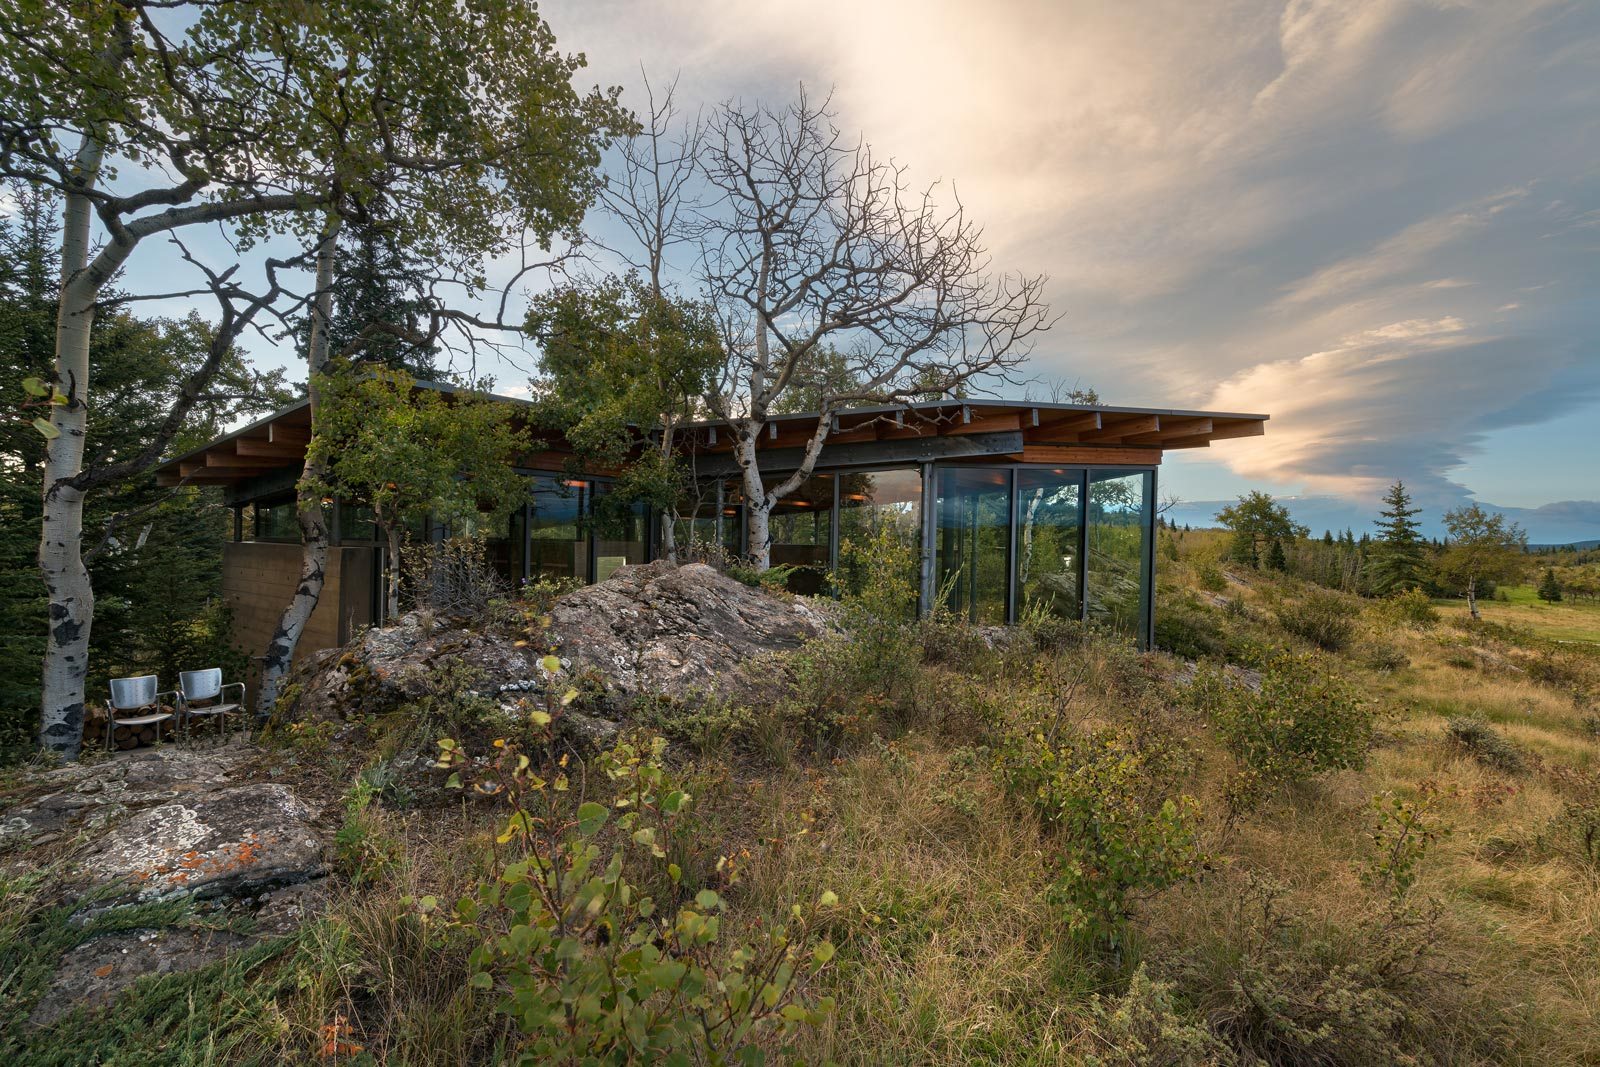 Rock House design is crafted to blend into the sandstone outcroppings and grassy hill below